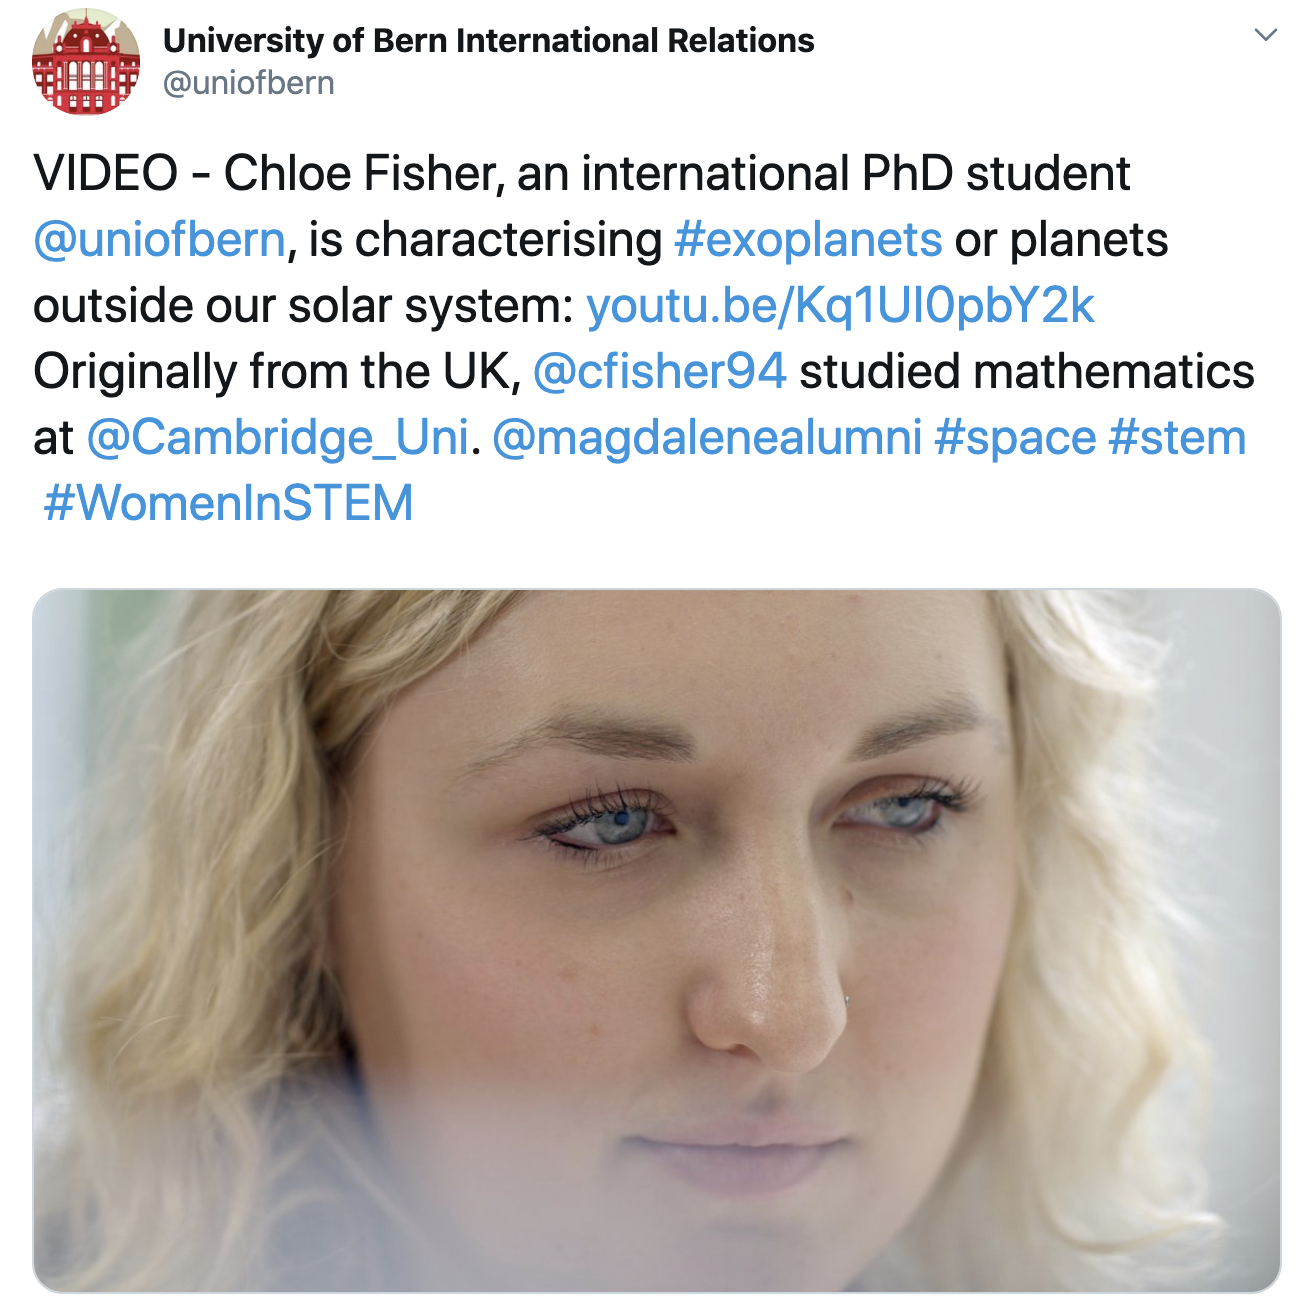 Tweet from University of Bern International Relations department. Below is a screen shot of the video showing Chloe's face.